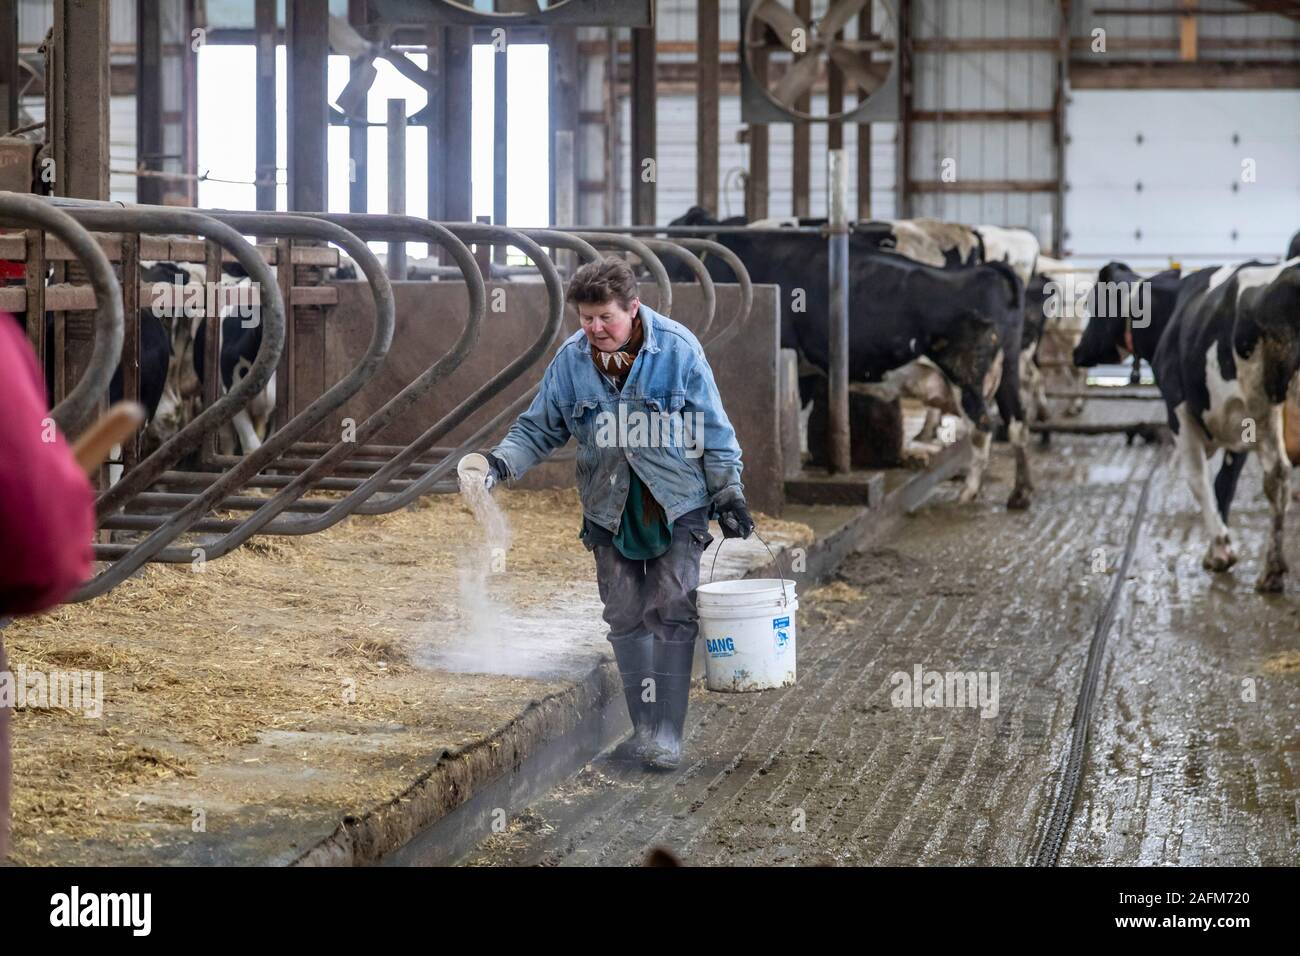 Omro, Wisconsin - Theo Knigge spreads lime in the cattle barn at Knigge Farms, a dairy farm with automated milking machines. Stock Photo